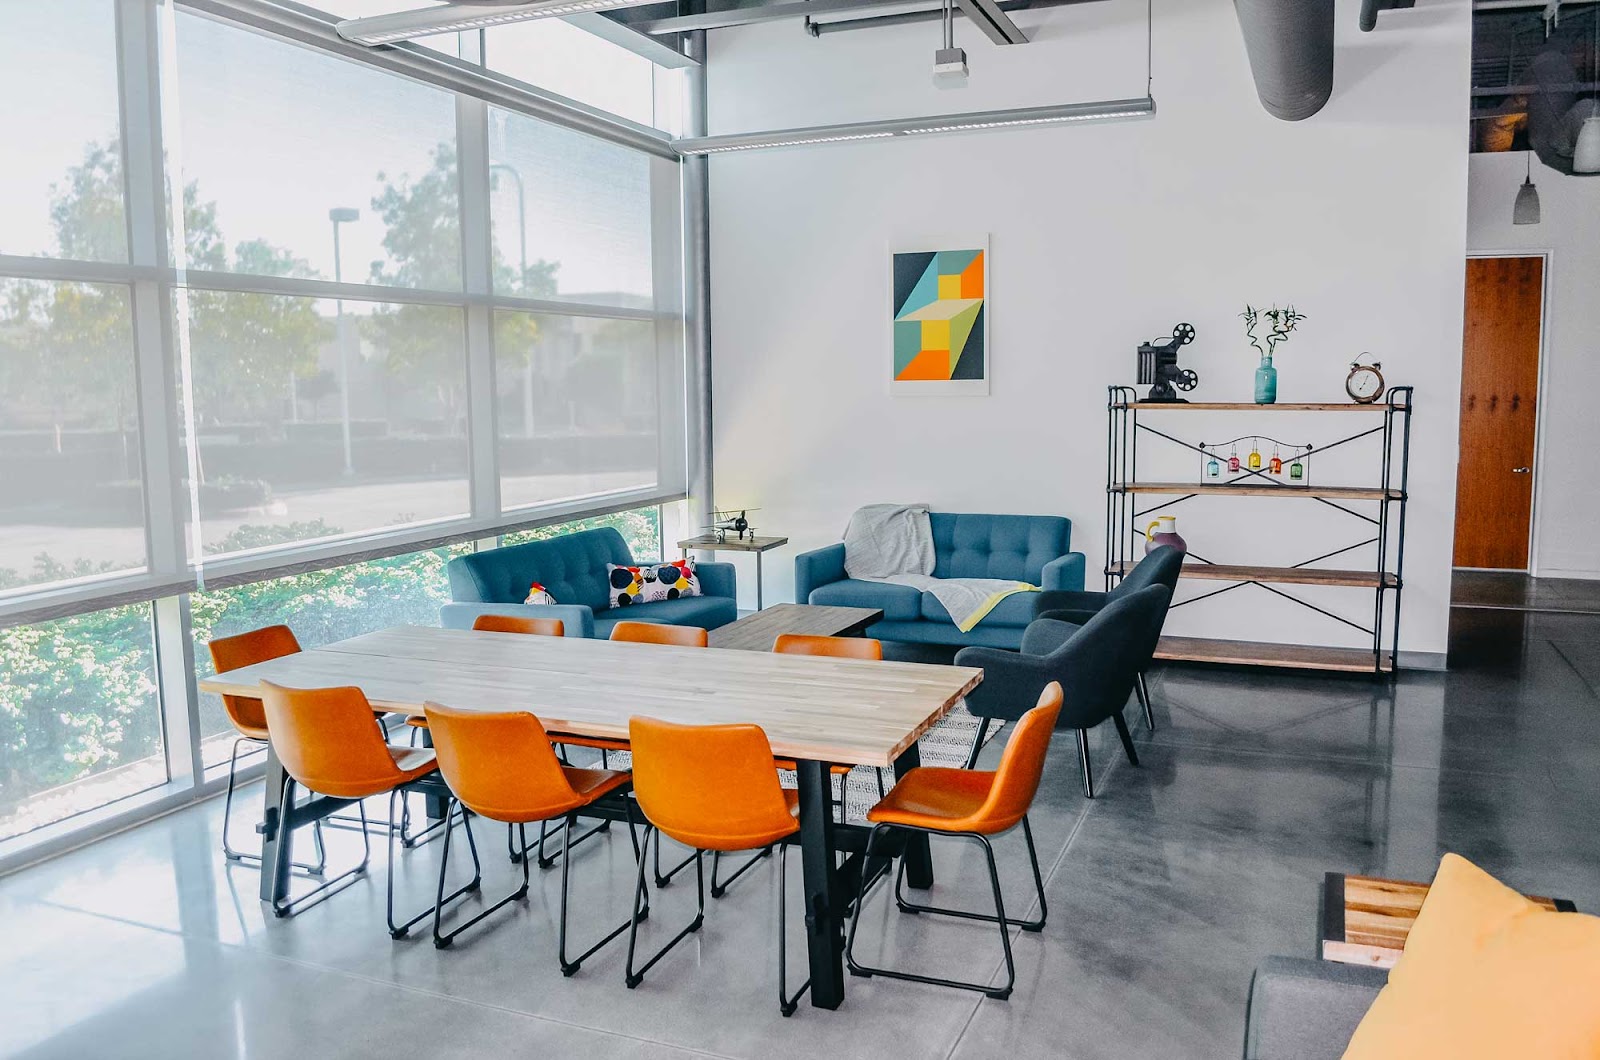 Coworking Irvine: 10 Best Spaces with Pricing, Amenities & Location [2021] 8